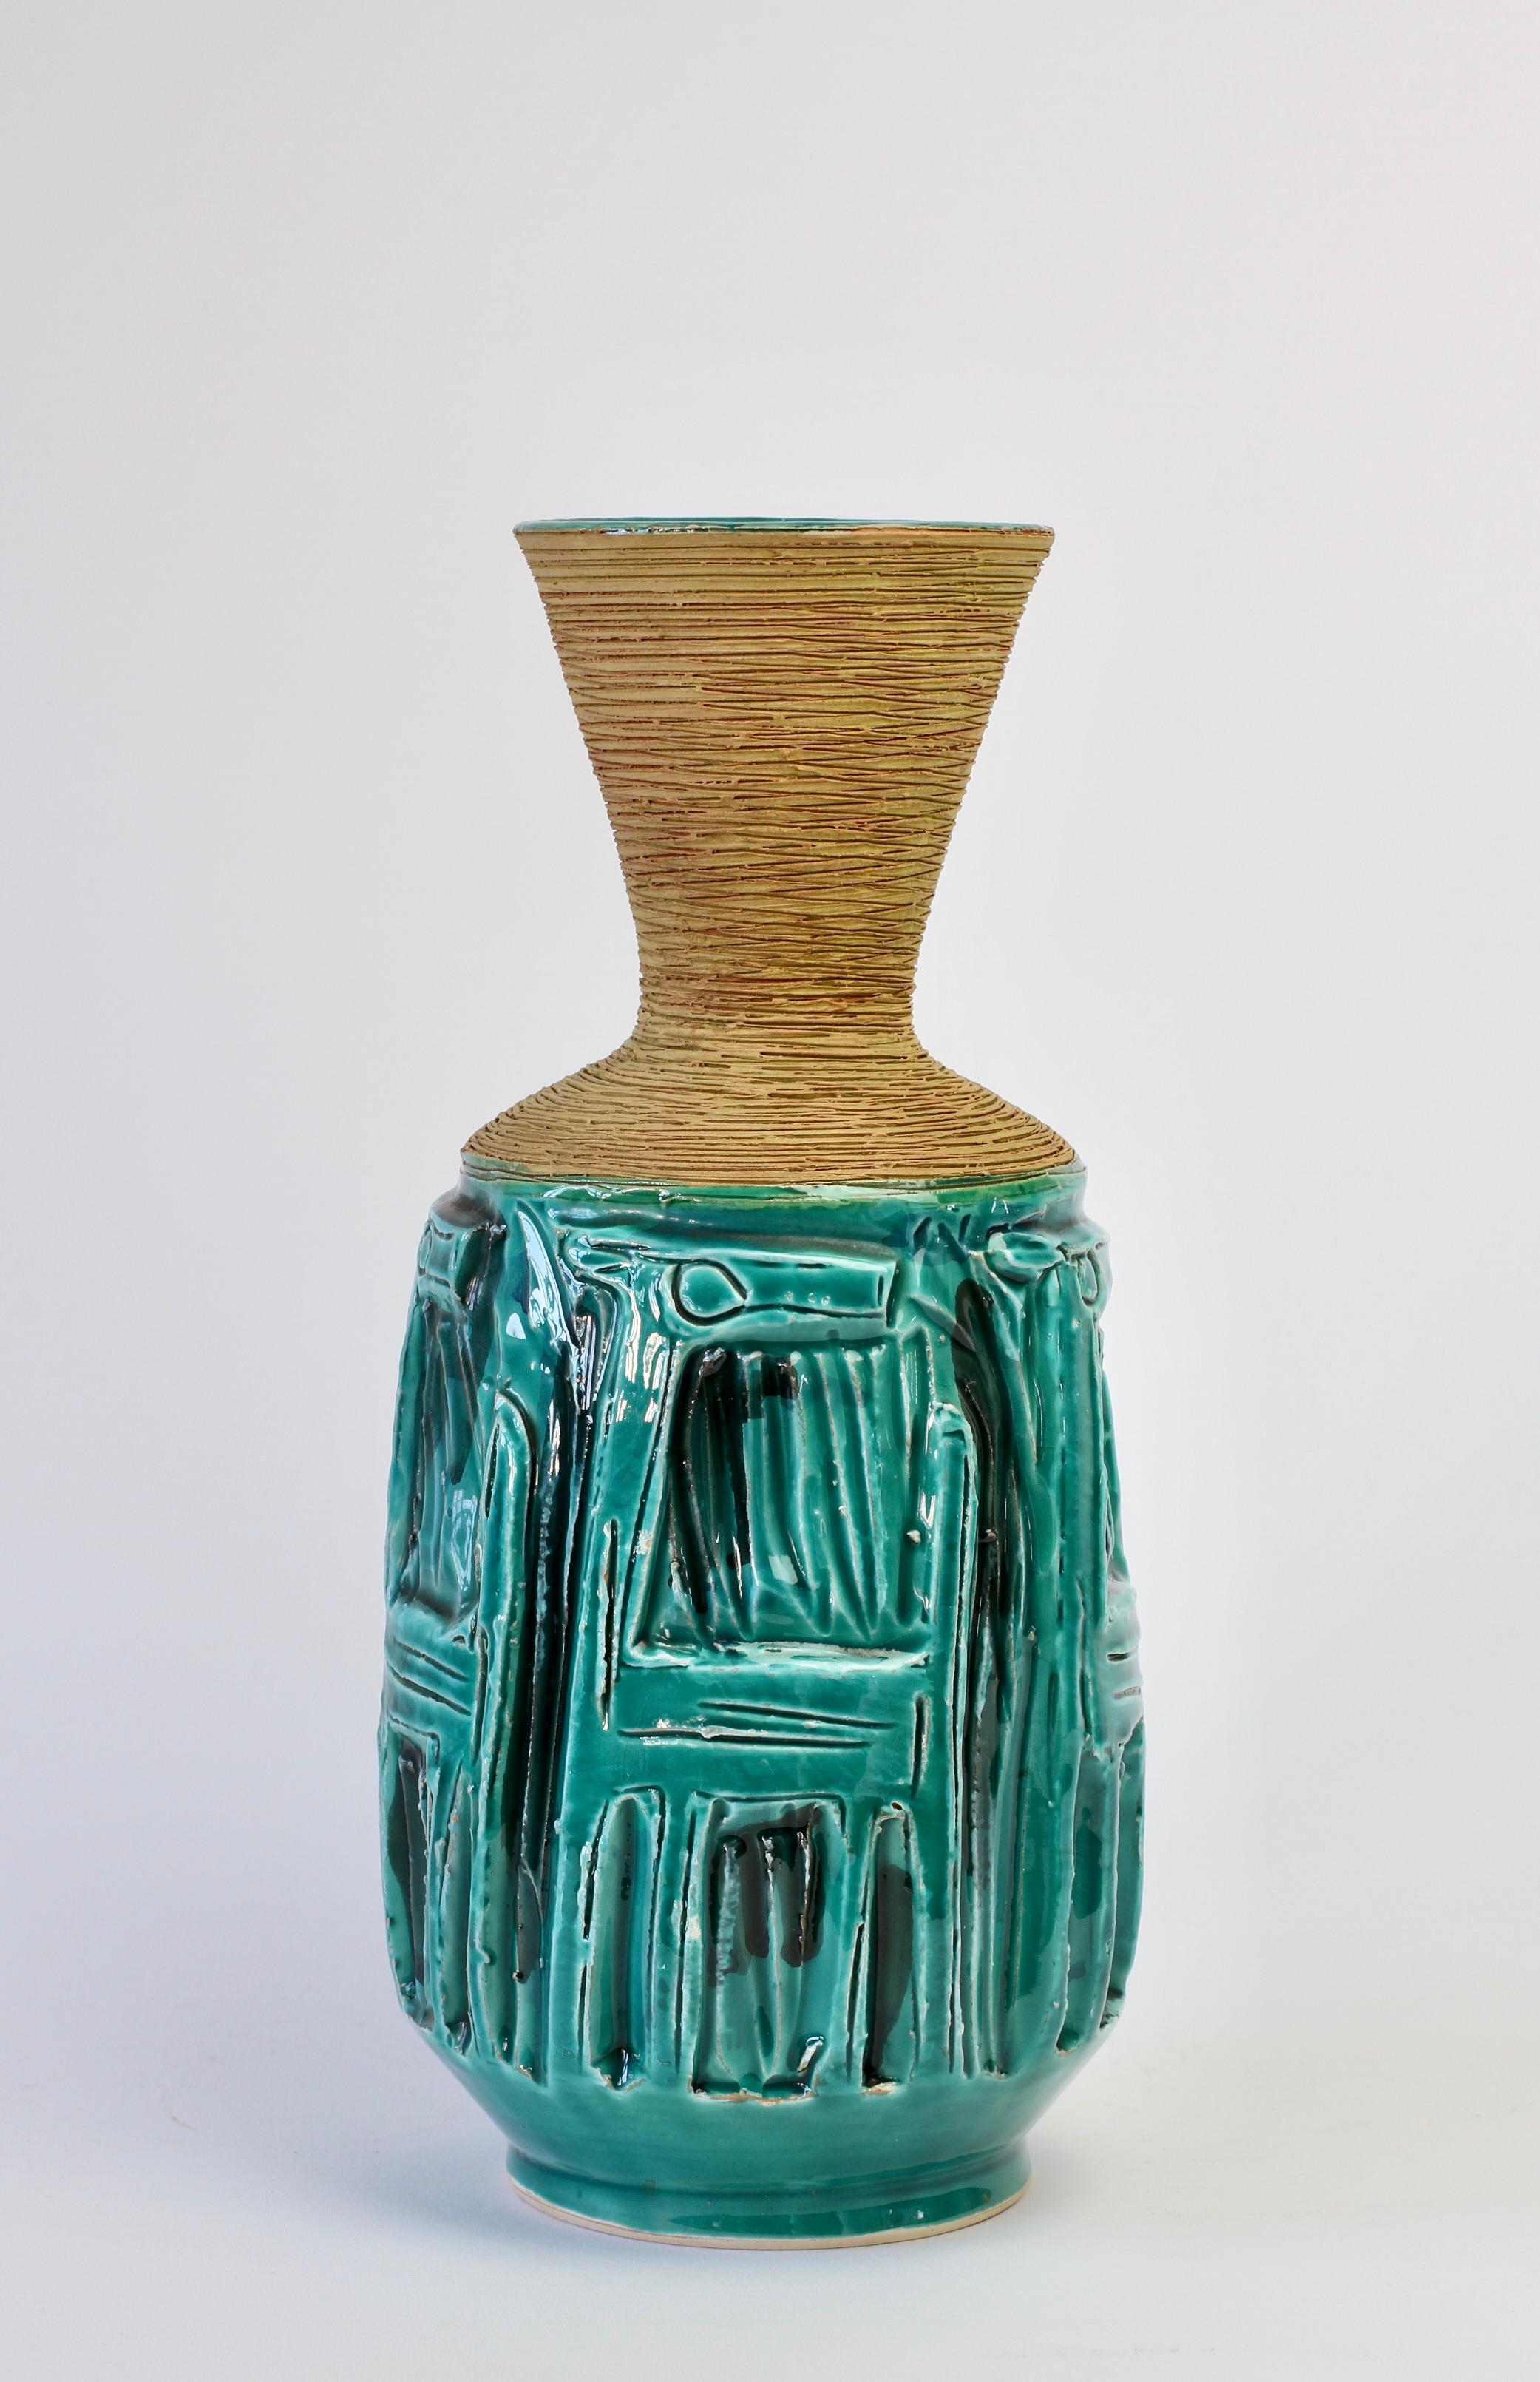 Beautifully detailed vase in vibrant turquoise (green / blue) with textured sgraffito shoulder and neck by Fratelli Fanciullacci, Italy, circa 1960s. Wonderful whimsical embossed animal pattern, possibly a dog. Lovely shading and texture to this